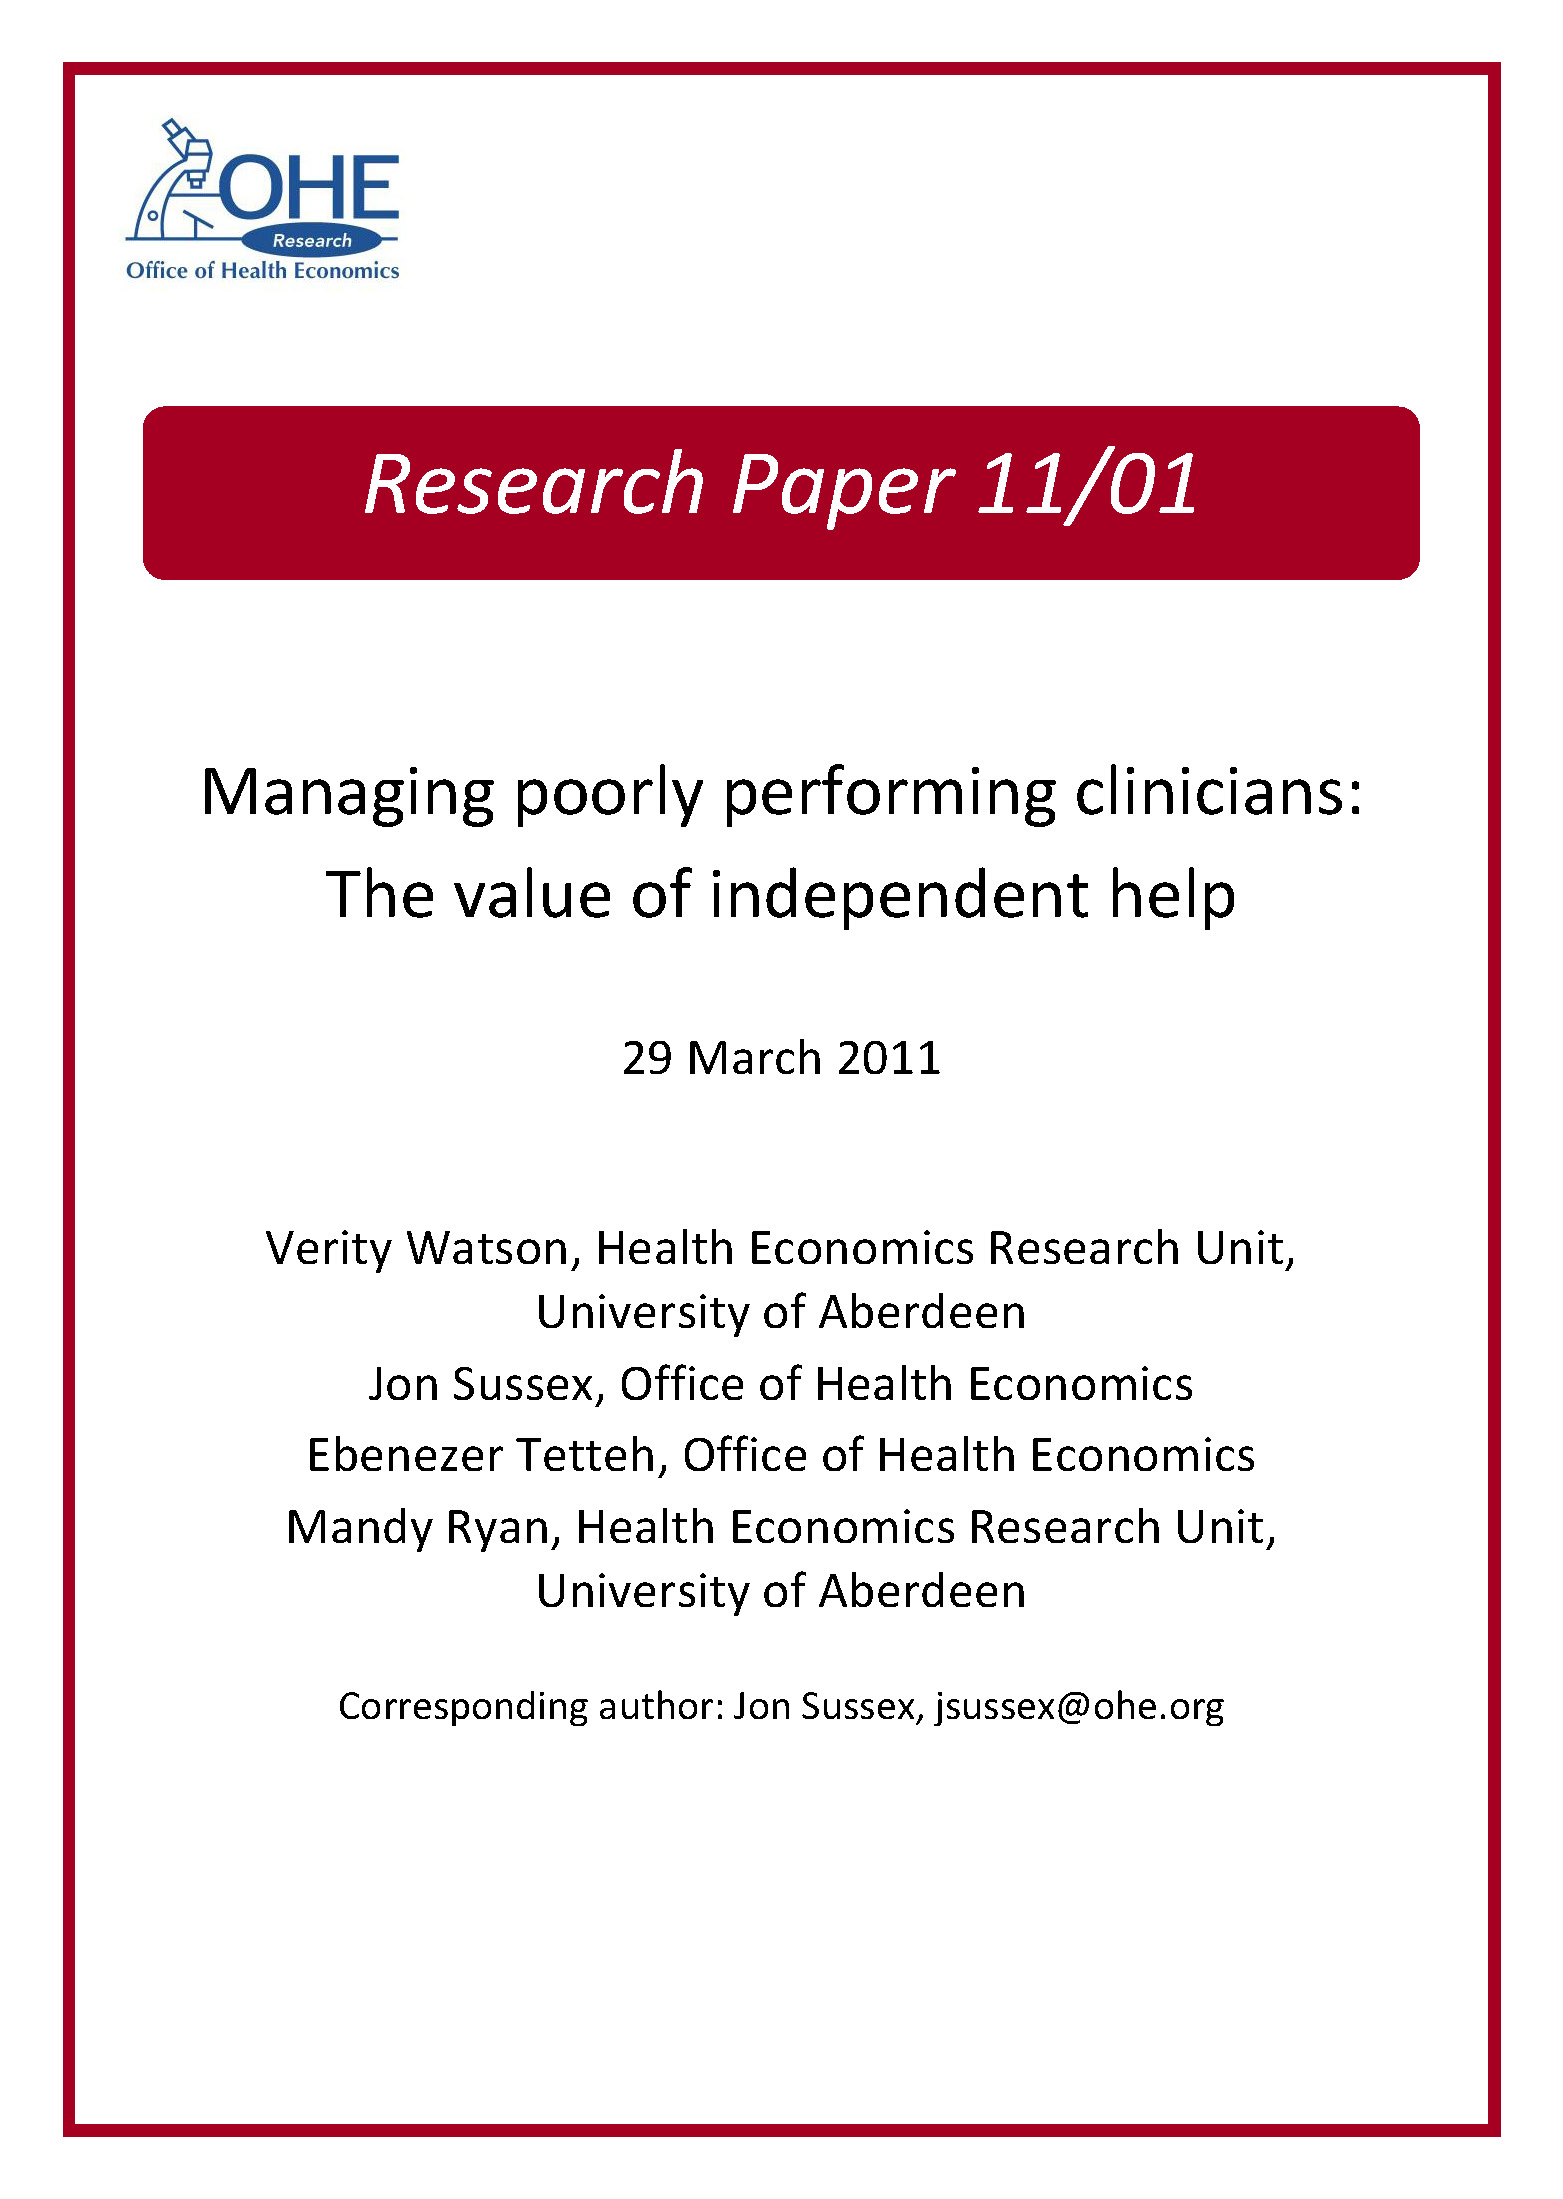 Managing Poorly Performing Clinicians: The Value of Independent Help